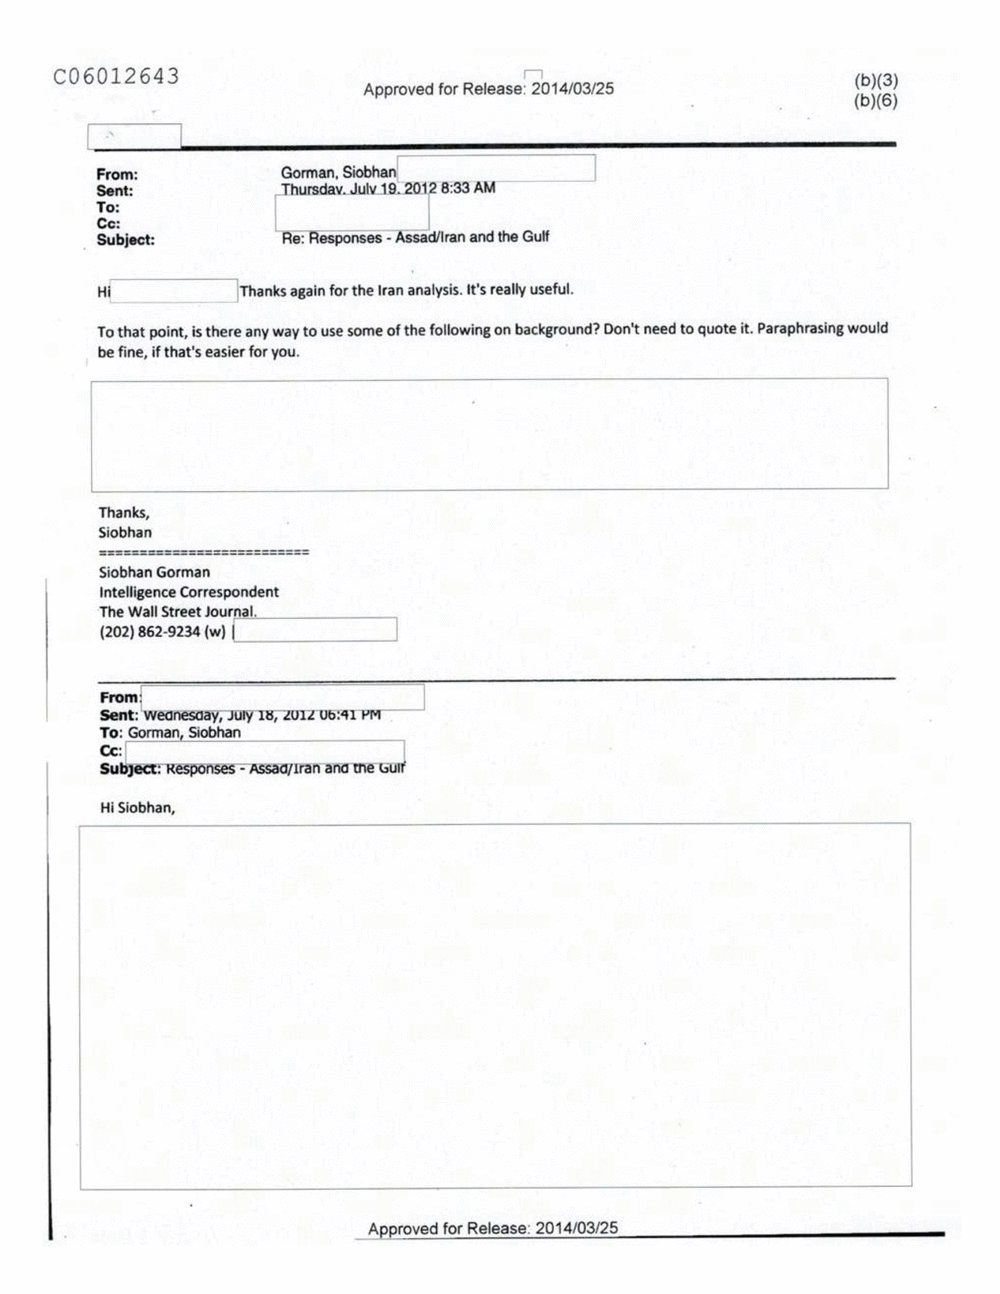 Page 210 from Email Correspondence Between Reporters and CIA Flacks